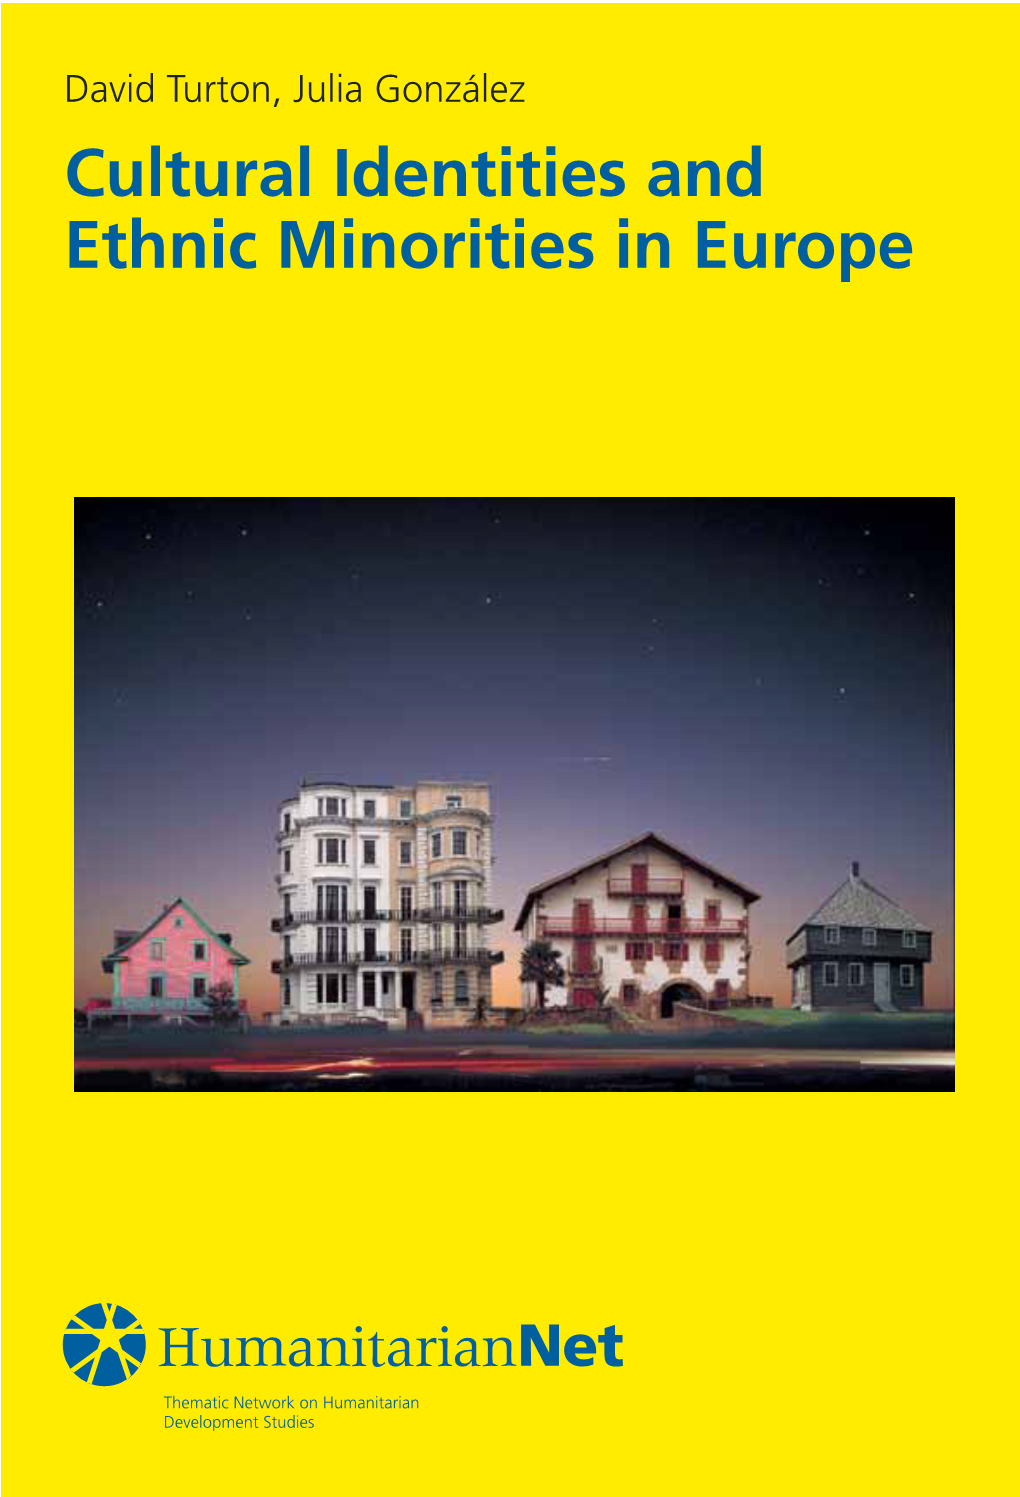 Cultural Identities and Ethnic Minorities in Europe